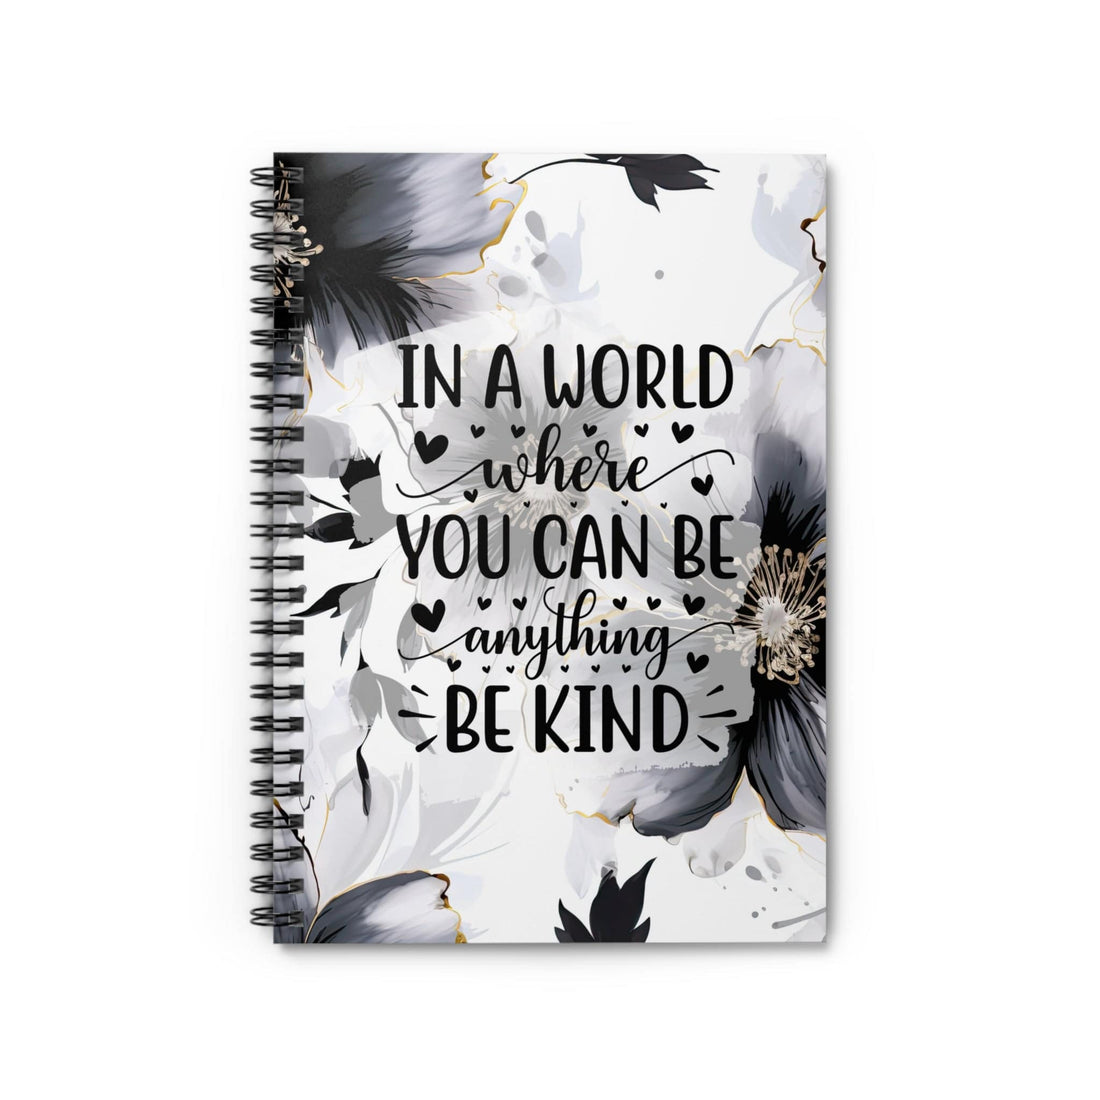 Floral Spiral Notebook, Lined Journal, Metallic Watercolor, with Self Care Quote